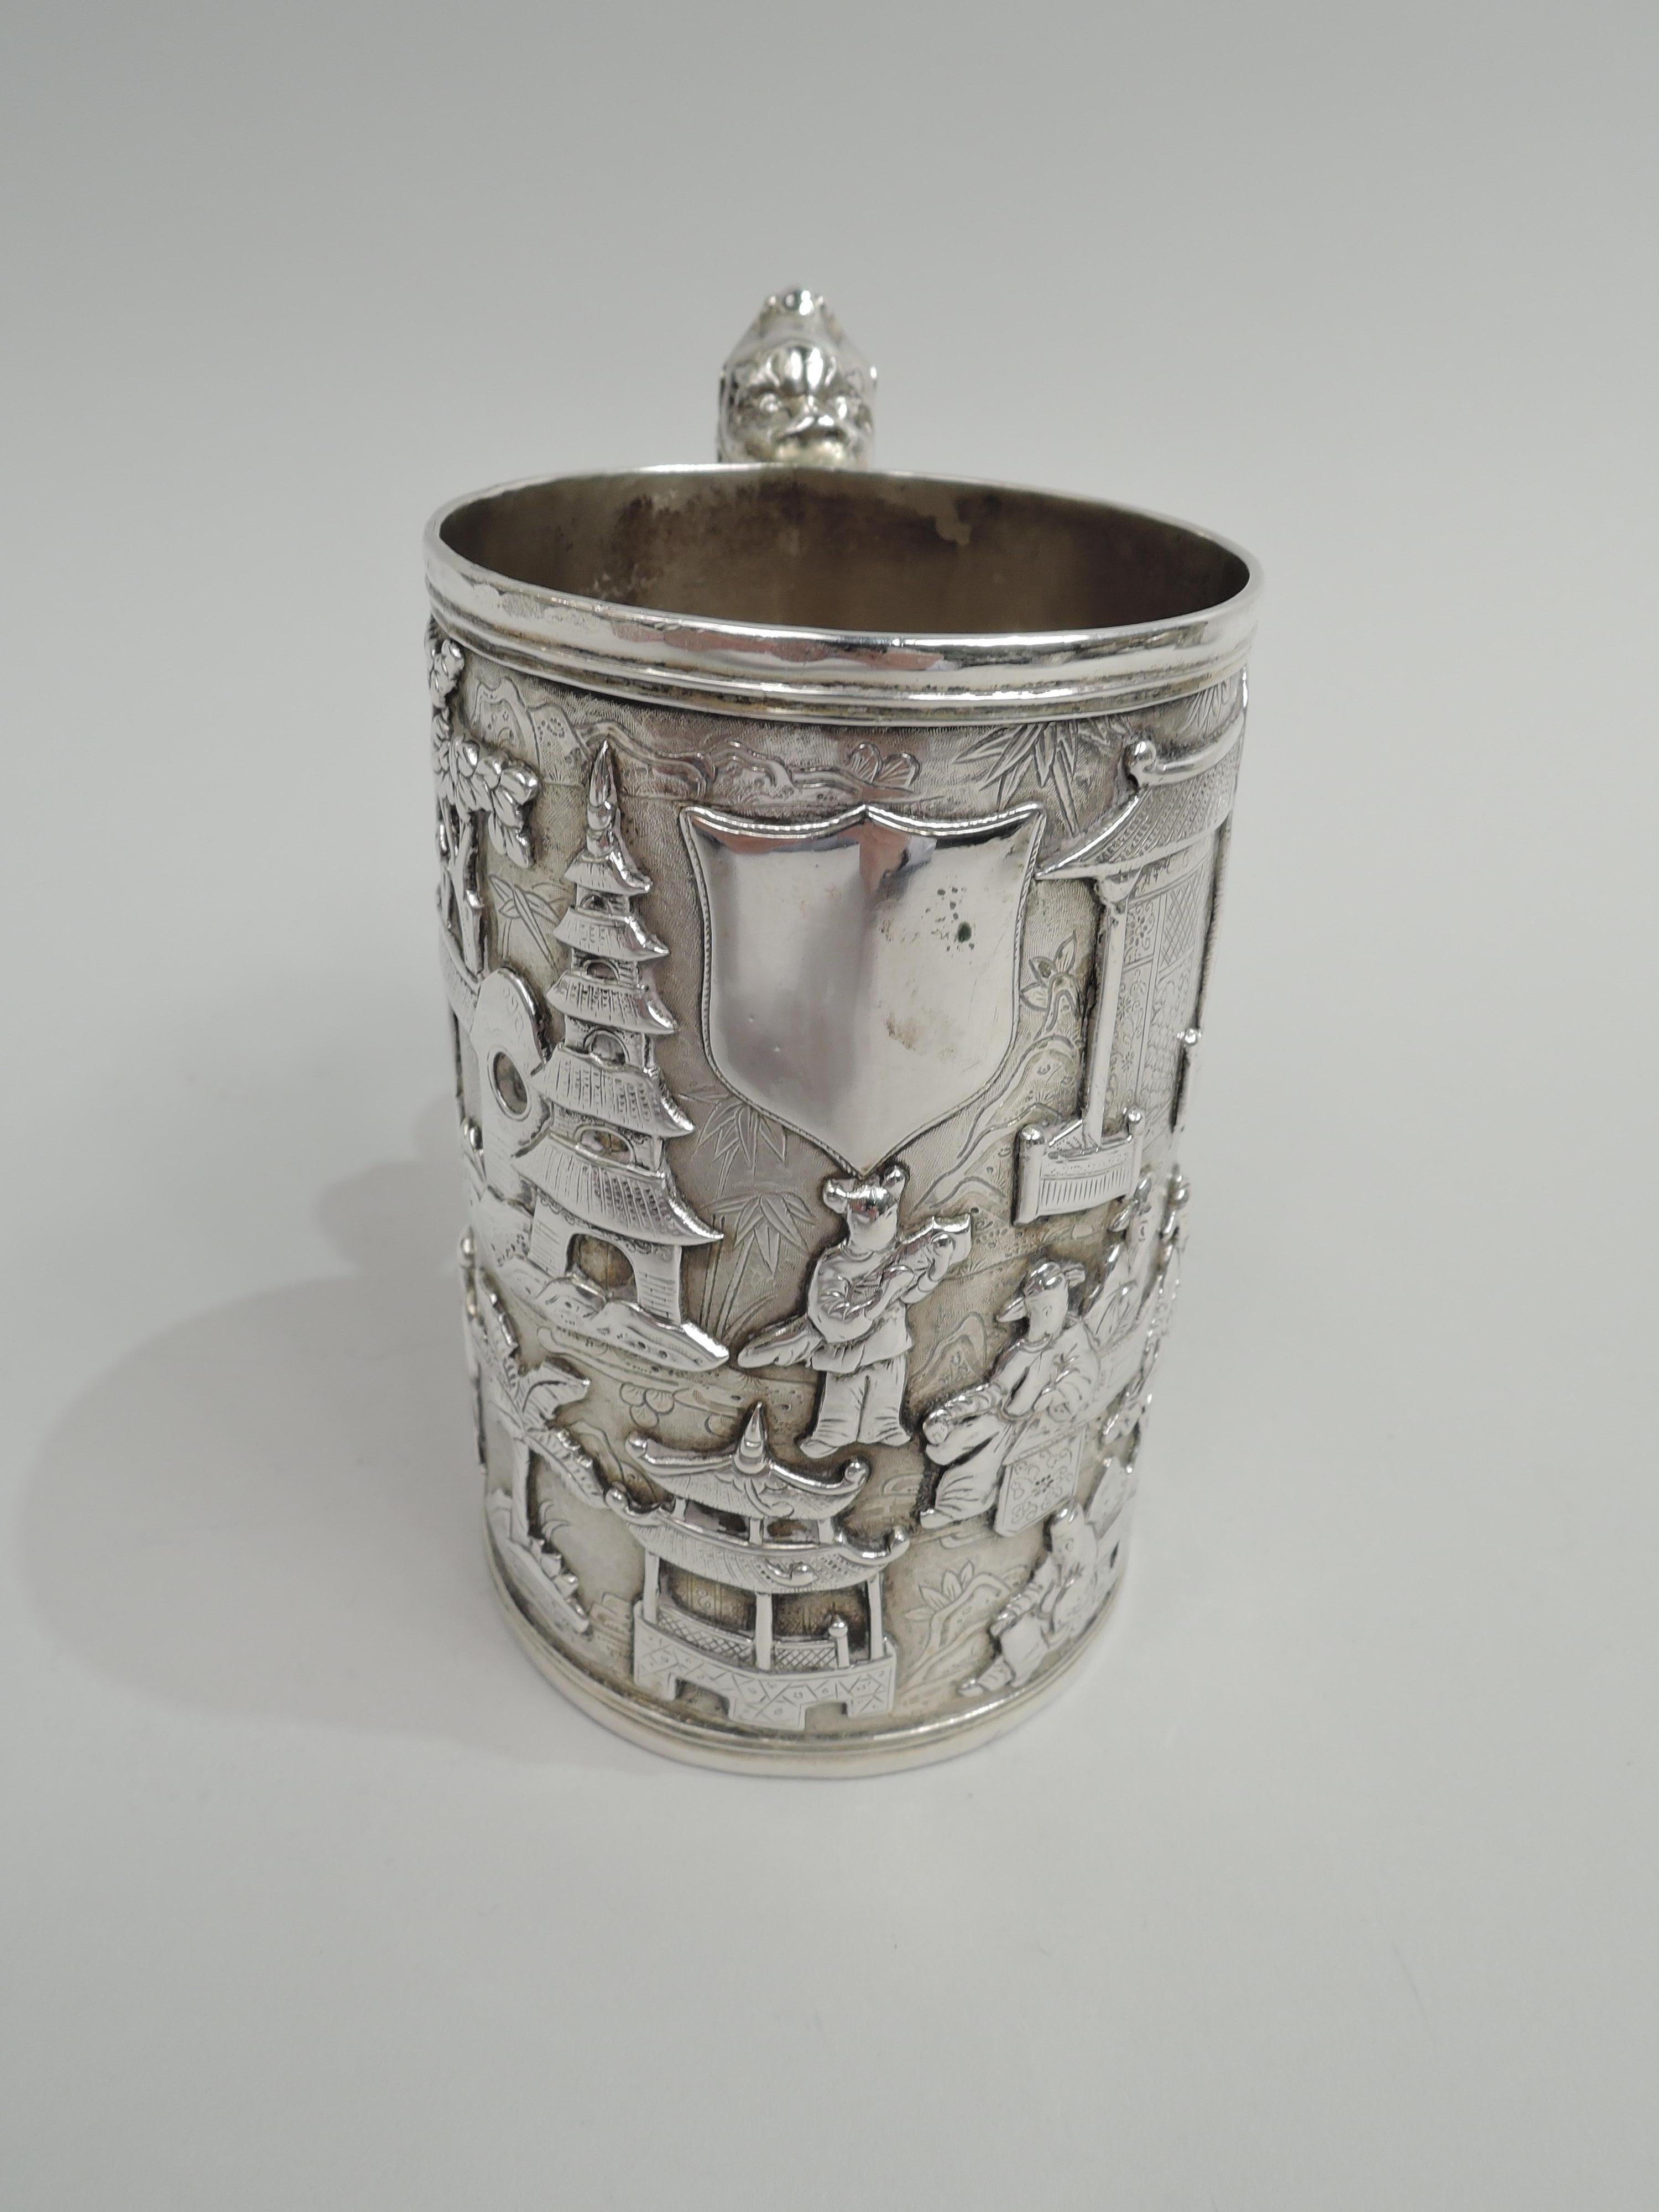 Chinese export silver mug, ca 1860. Straight and upward tapering sides with applied pictorial frieze on engraved and stippled ground: Scenes of social life with contemplative sages and chaste maidens amongst palm trees and pagodas. Pastoral